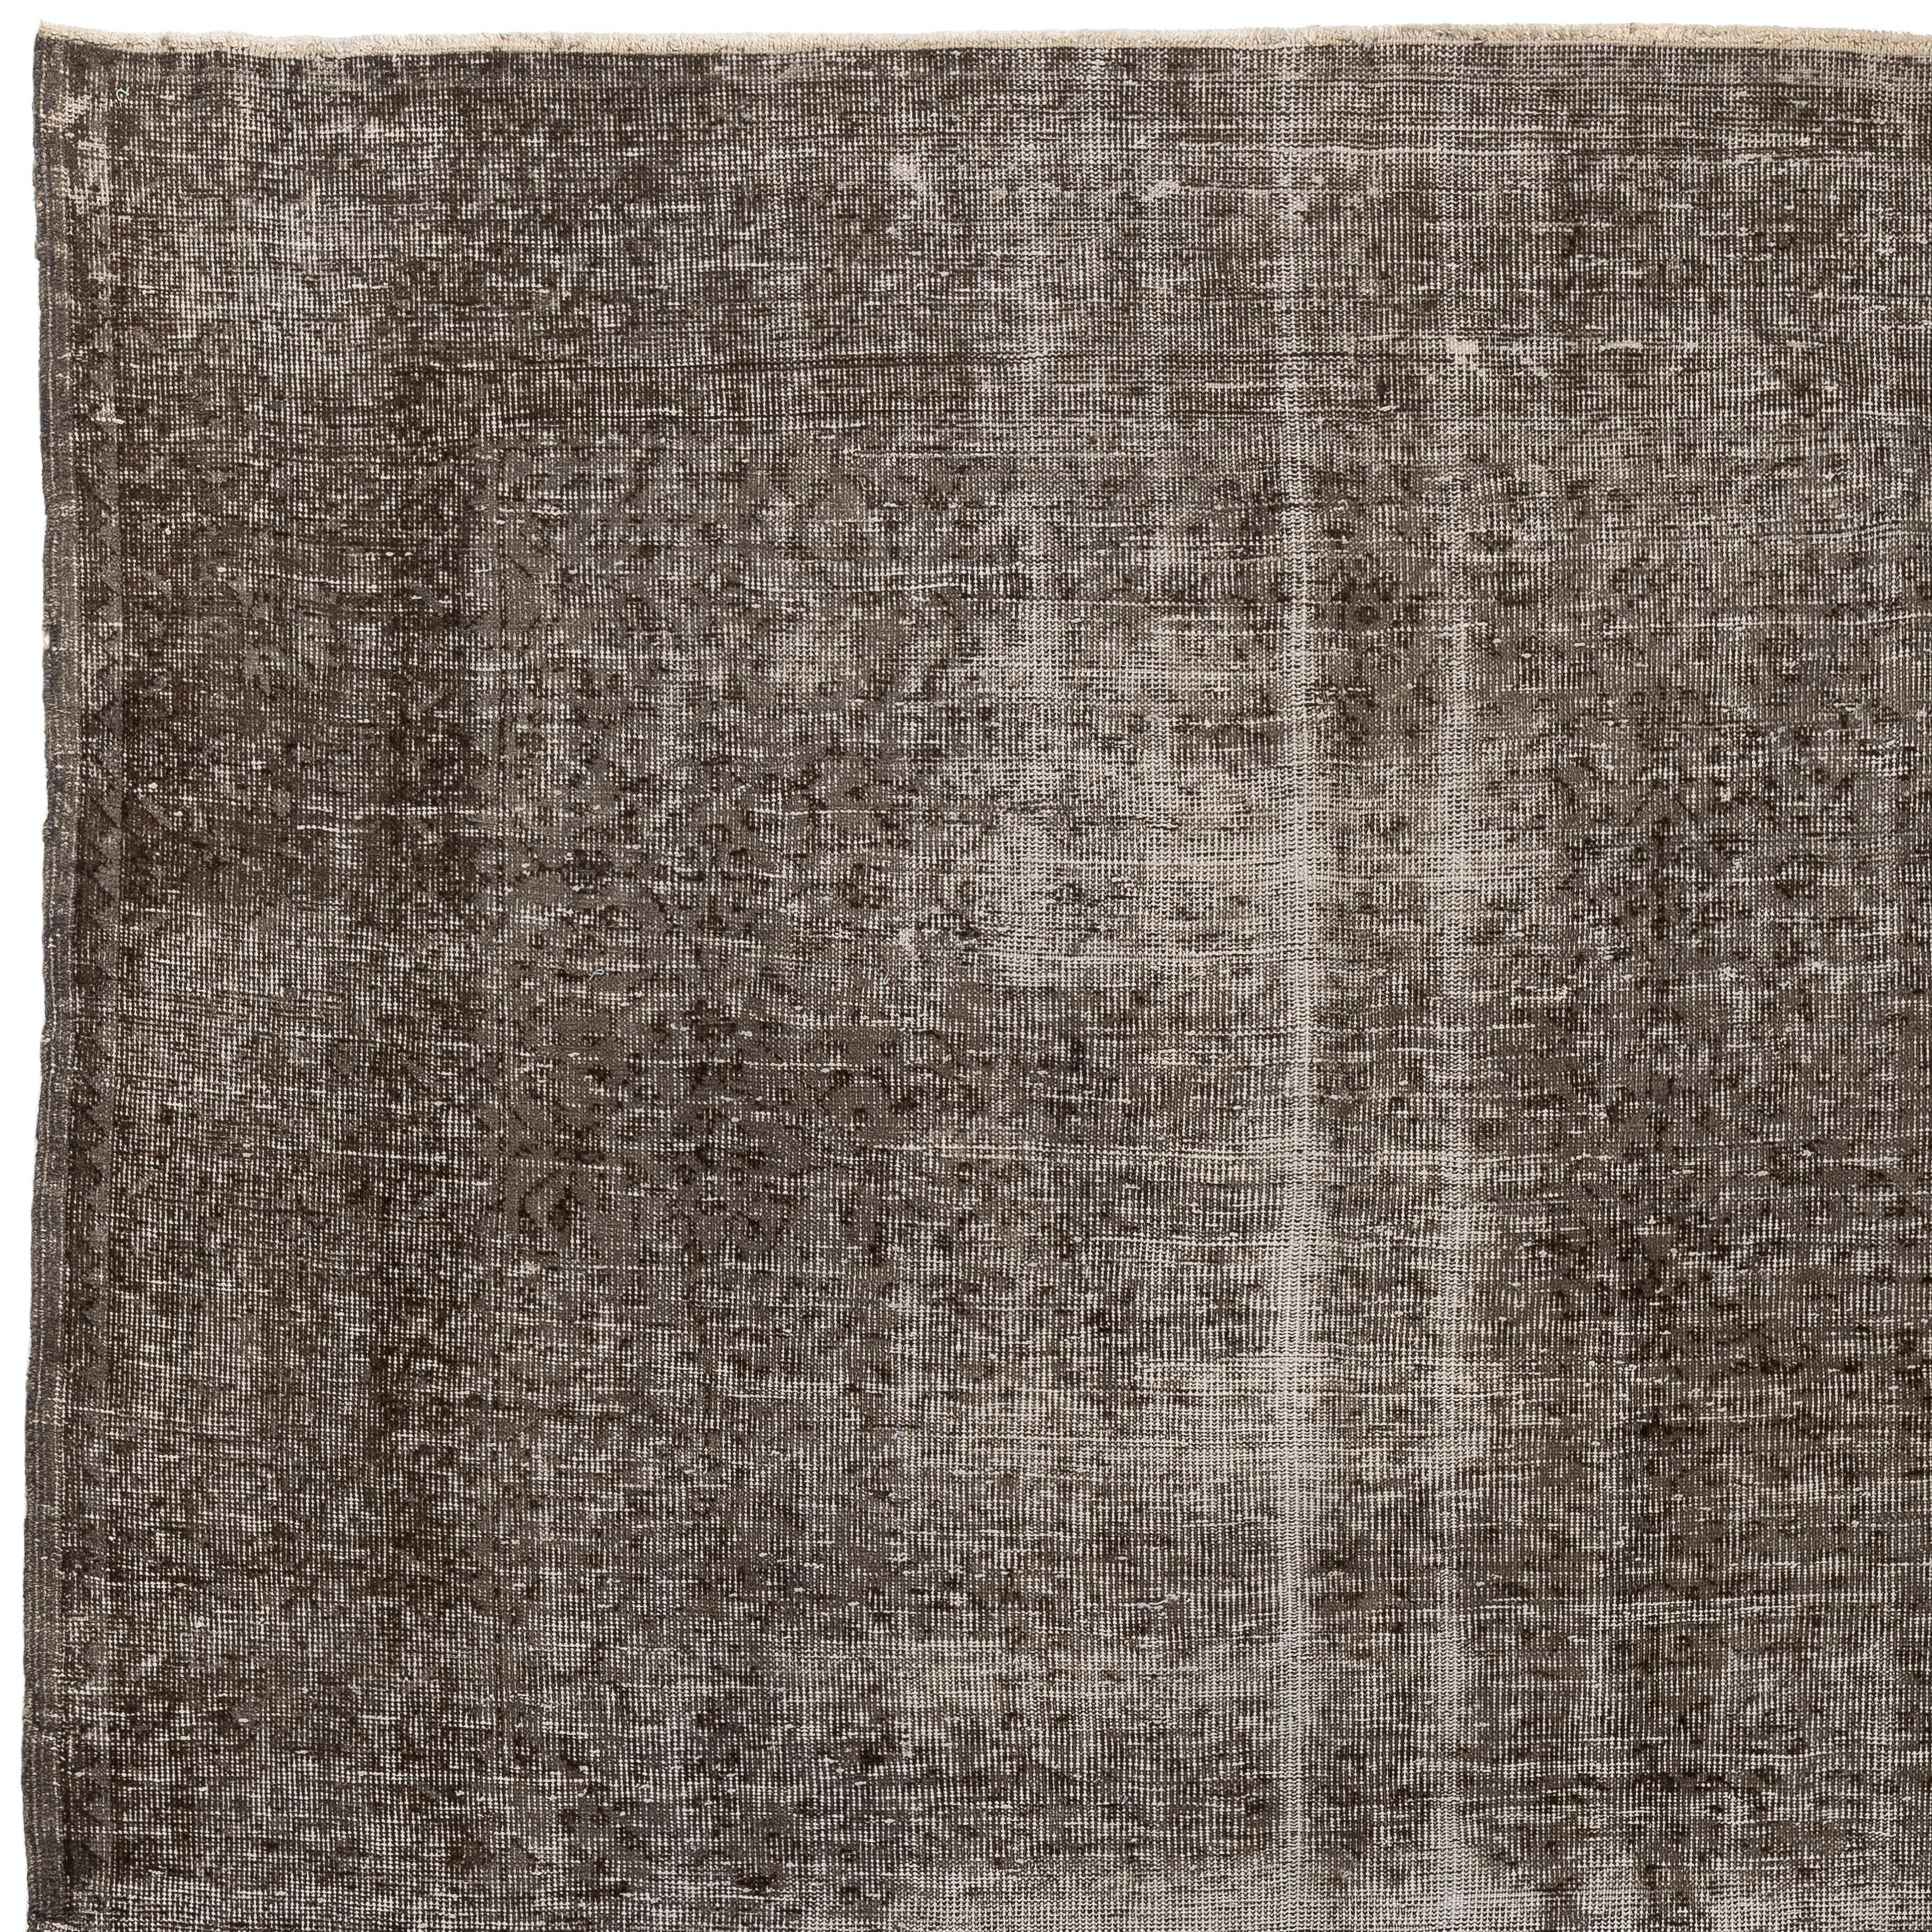 Hand-Woven 7x10 Ft Handmade Distressed 1950s Turkish Rug in Gray and Taupe, Modern Carpet For Sale